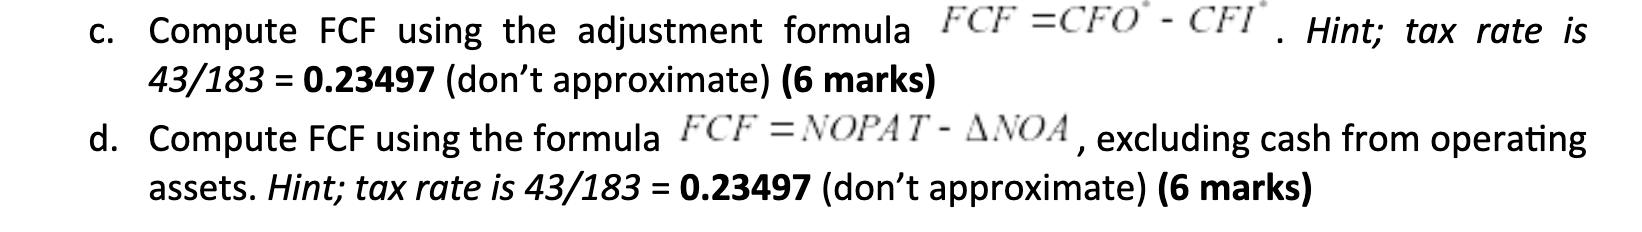 C. Compute FCF using the adjustment formula FCF =CFO - CFI. Hint; tax rate is 43/183 = 0.23497 (dont approximate) (6 marks)